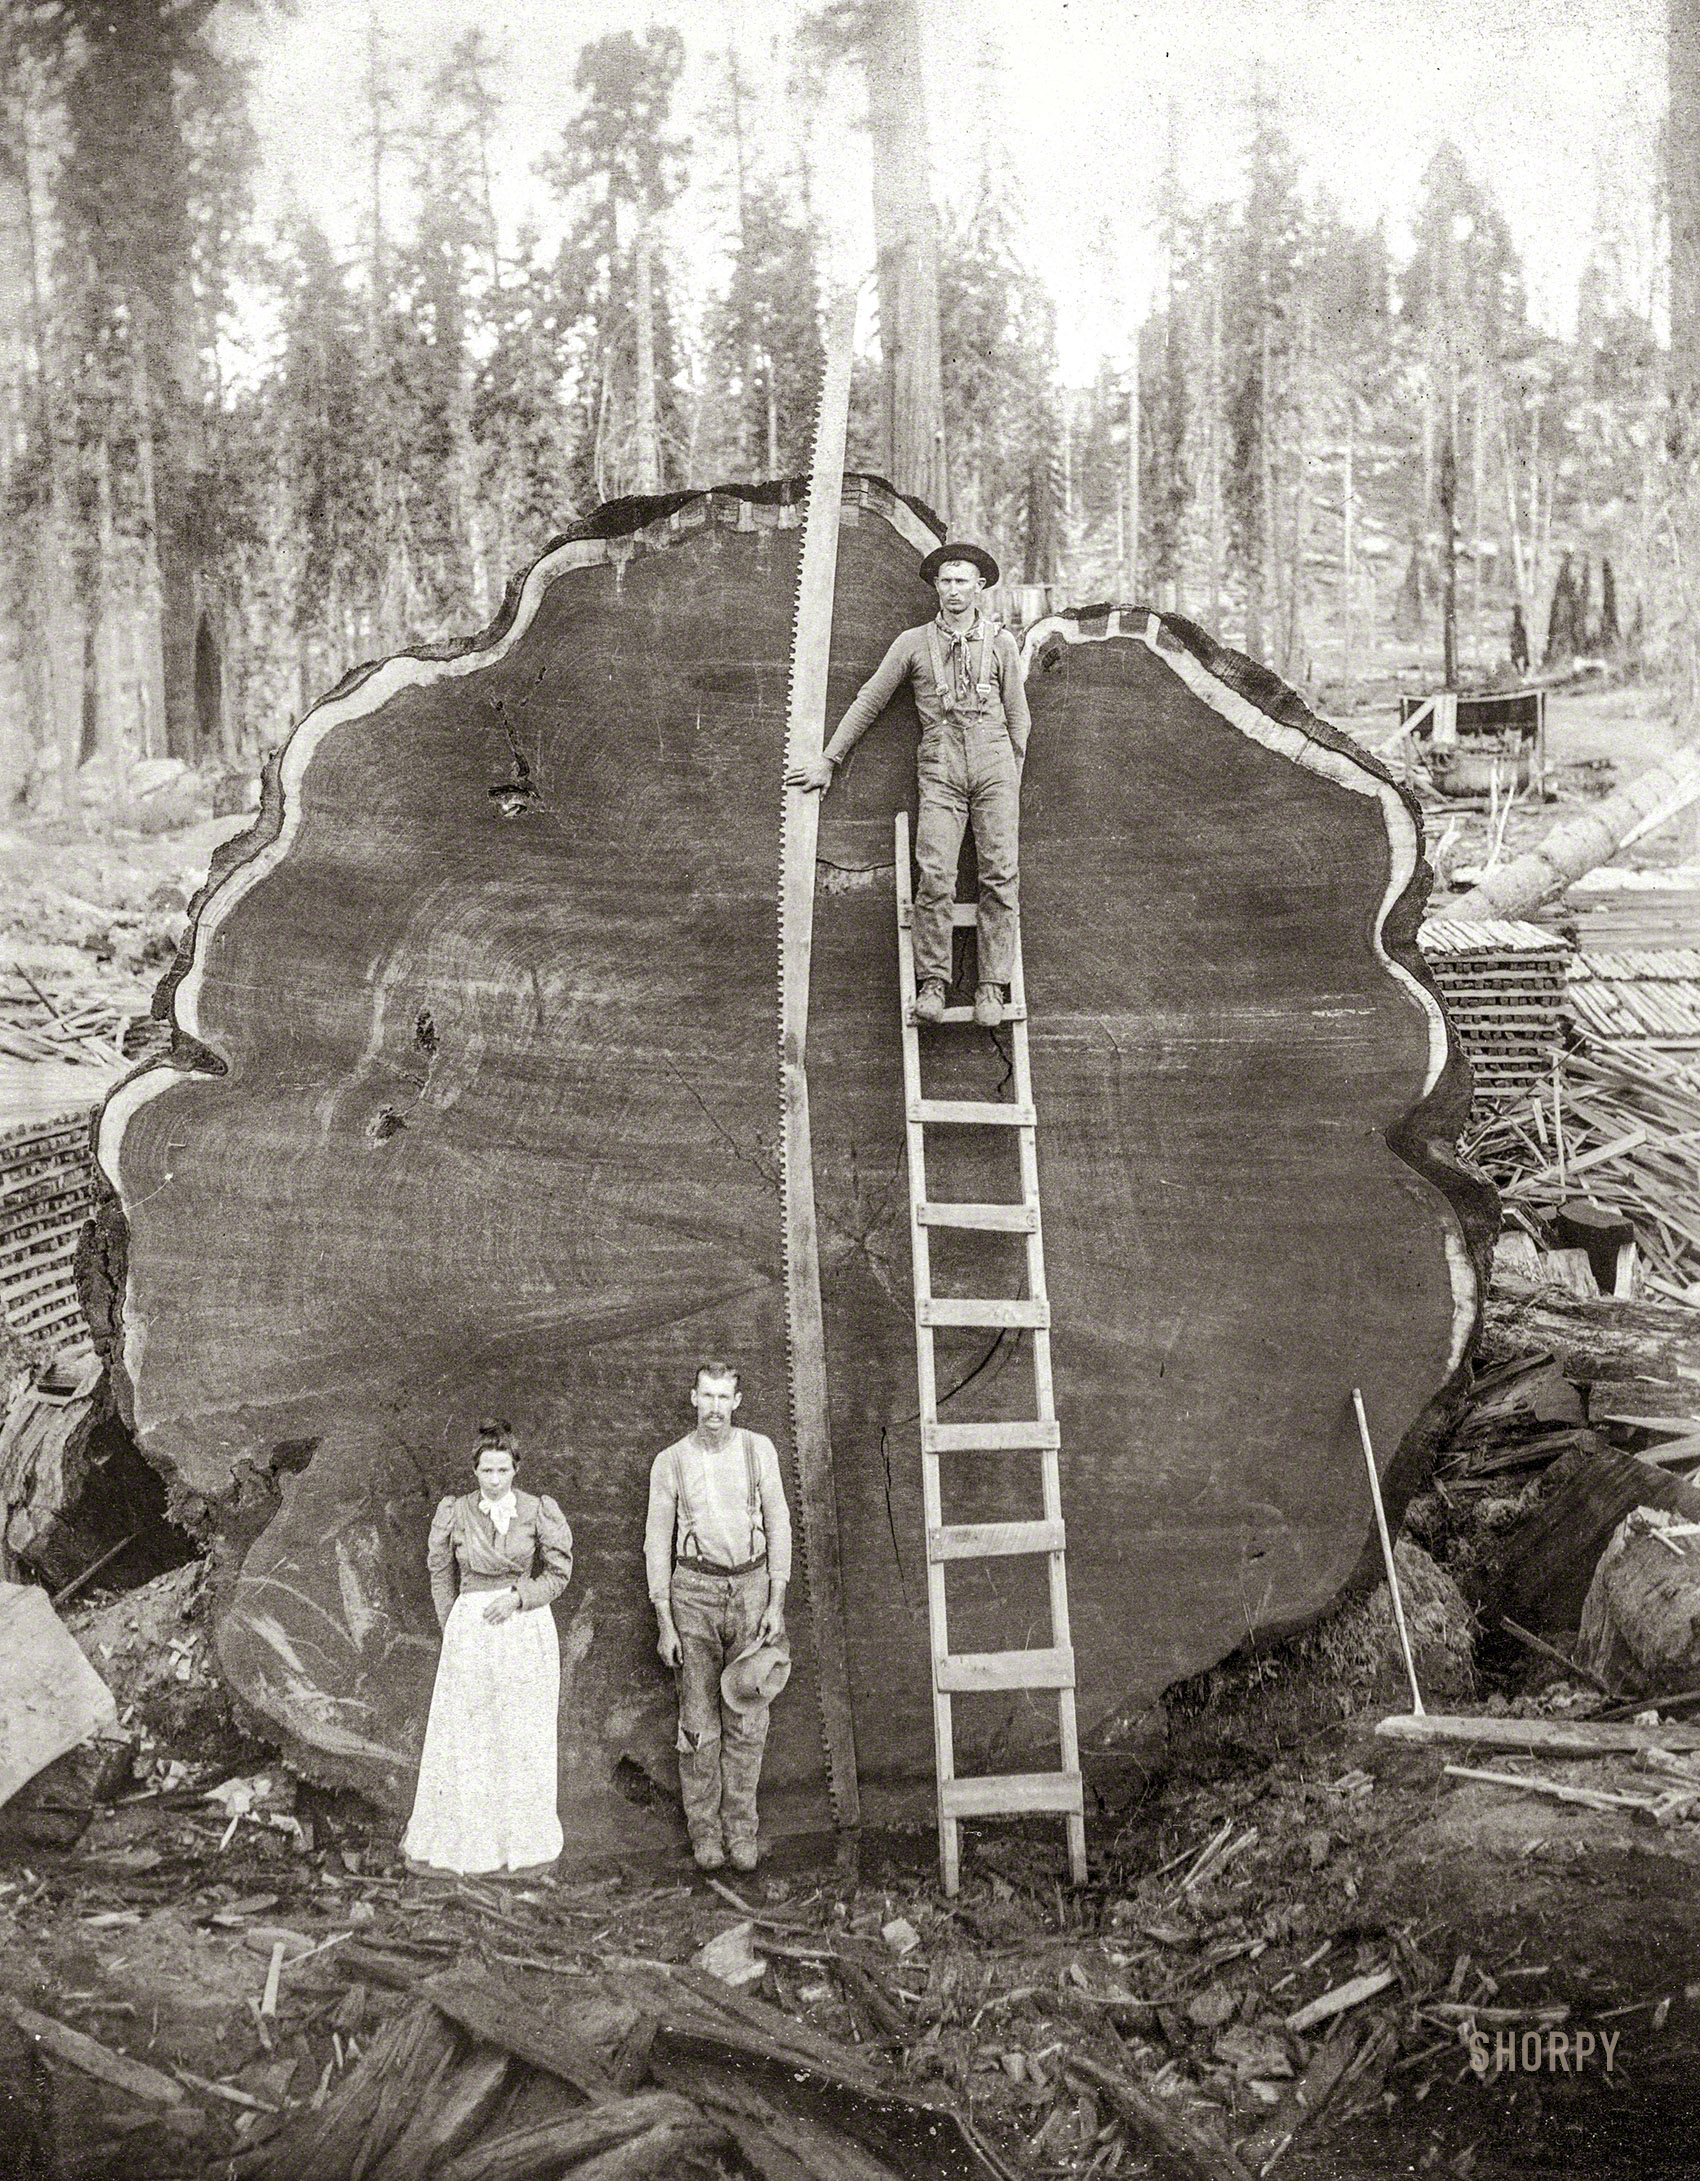 1891. "Camp Badger, Tulare County, California. End of Mark Twain log, diameter 18 feet. Slab of Giant Sequoia, Kings River Grove (now part of Kings Canyon National Park), California, felled in 1891, to be exhibited in the Natural History Museum in New York." Albumen print by Charles Clifford Curtis. View full size.